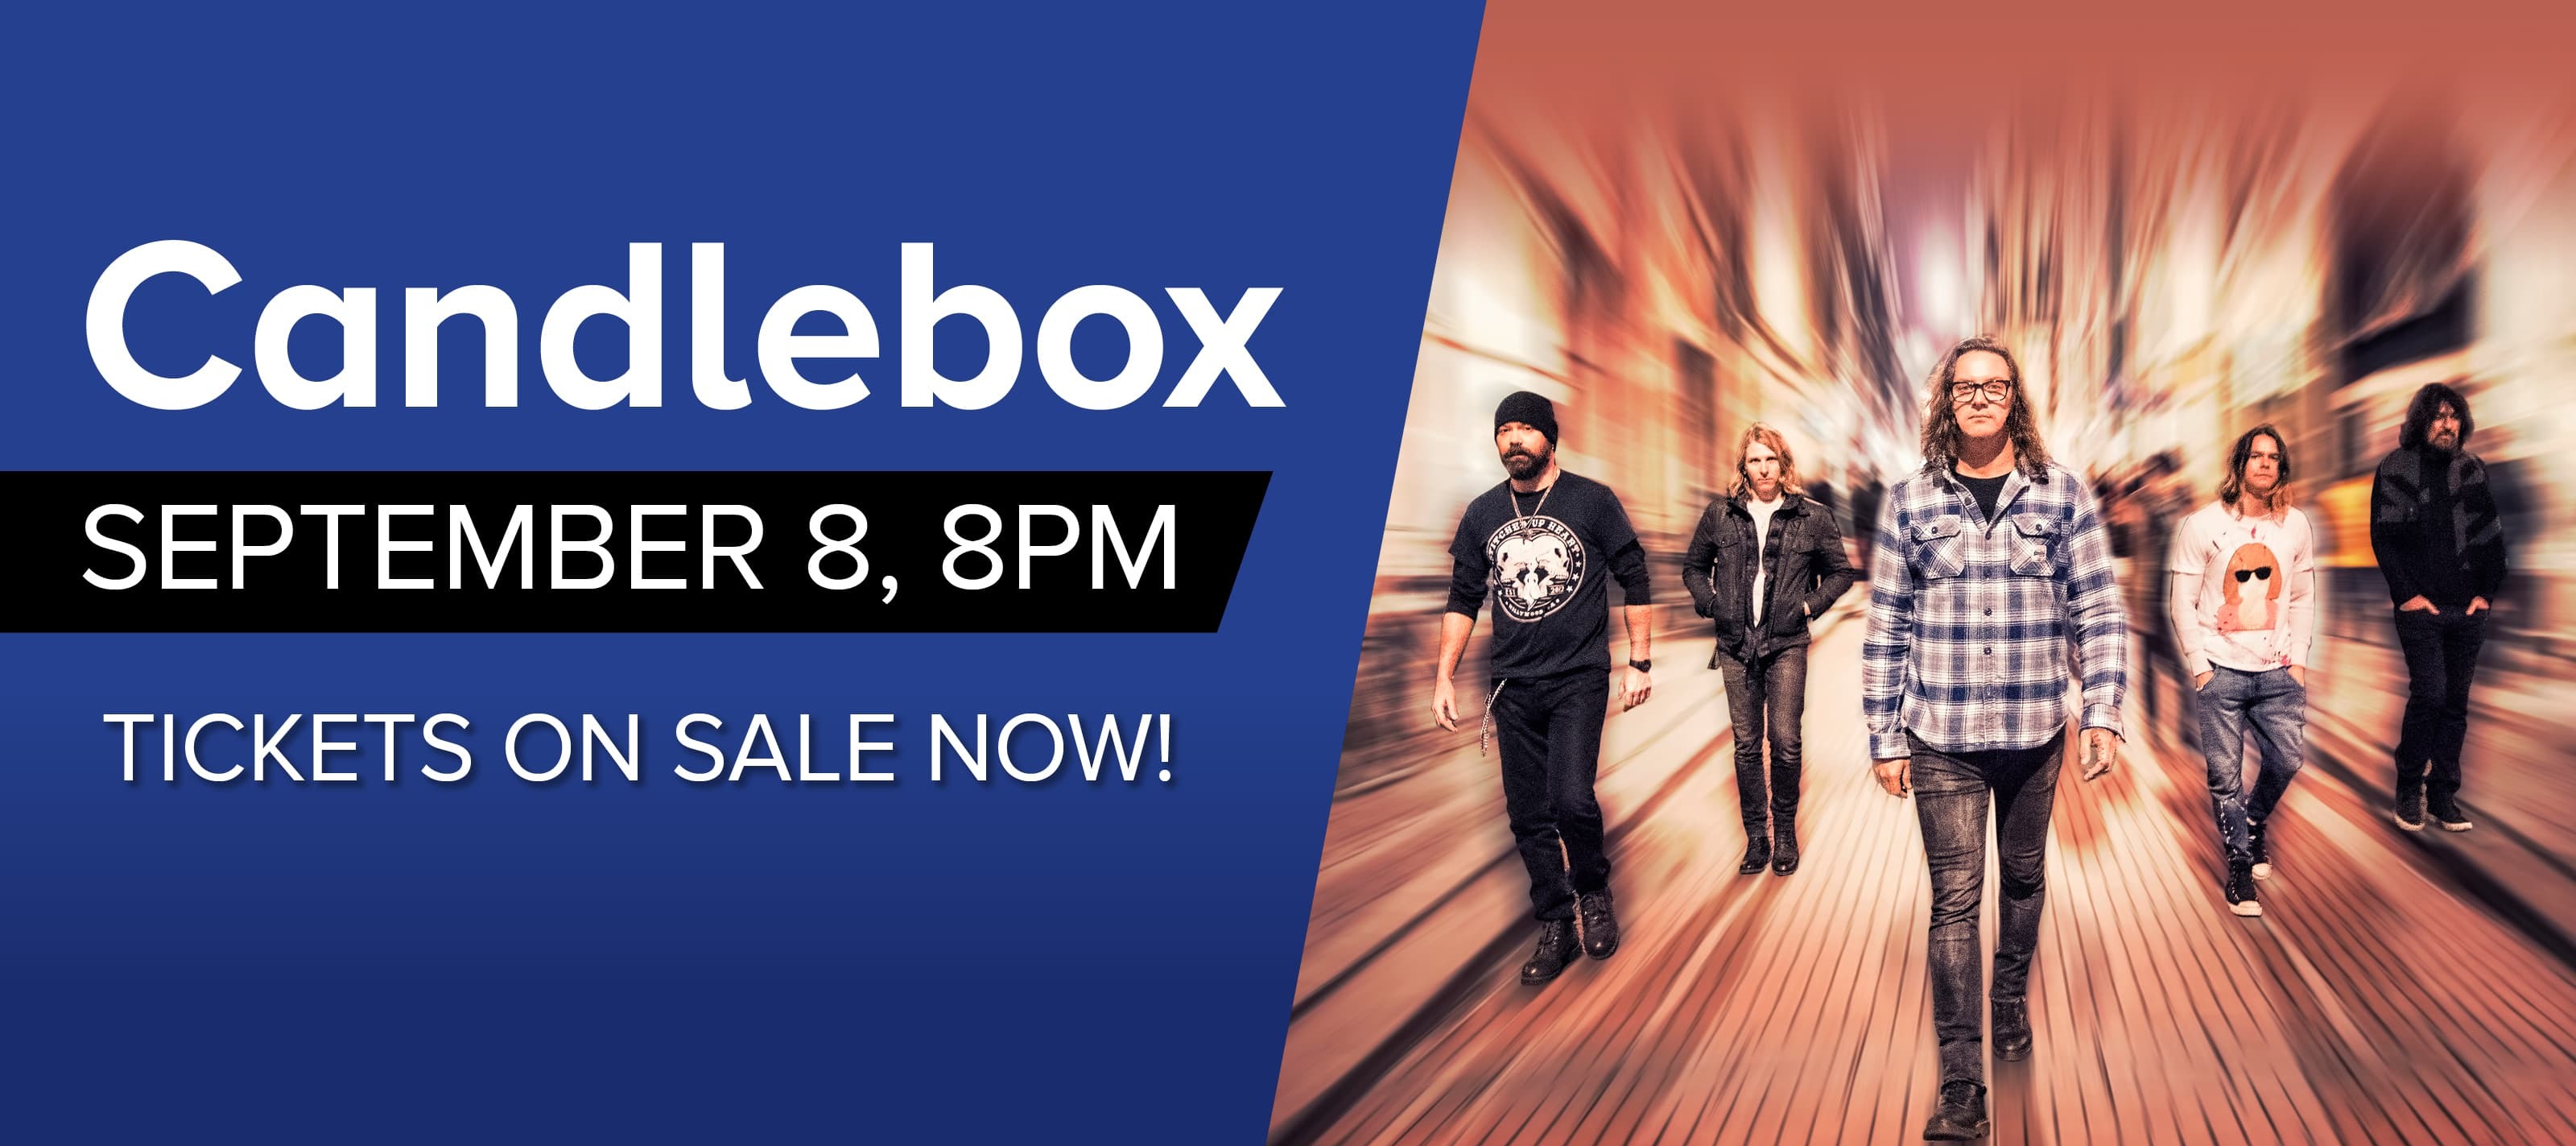 candlebox september 8 at 8pm. tickets on sale now